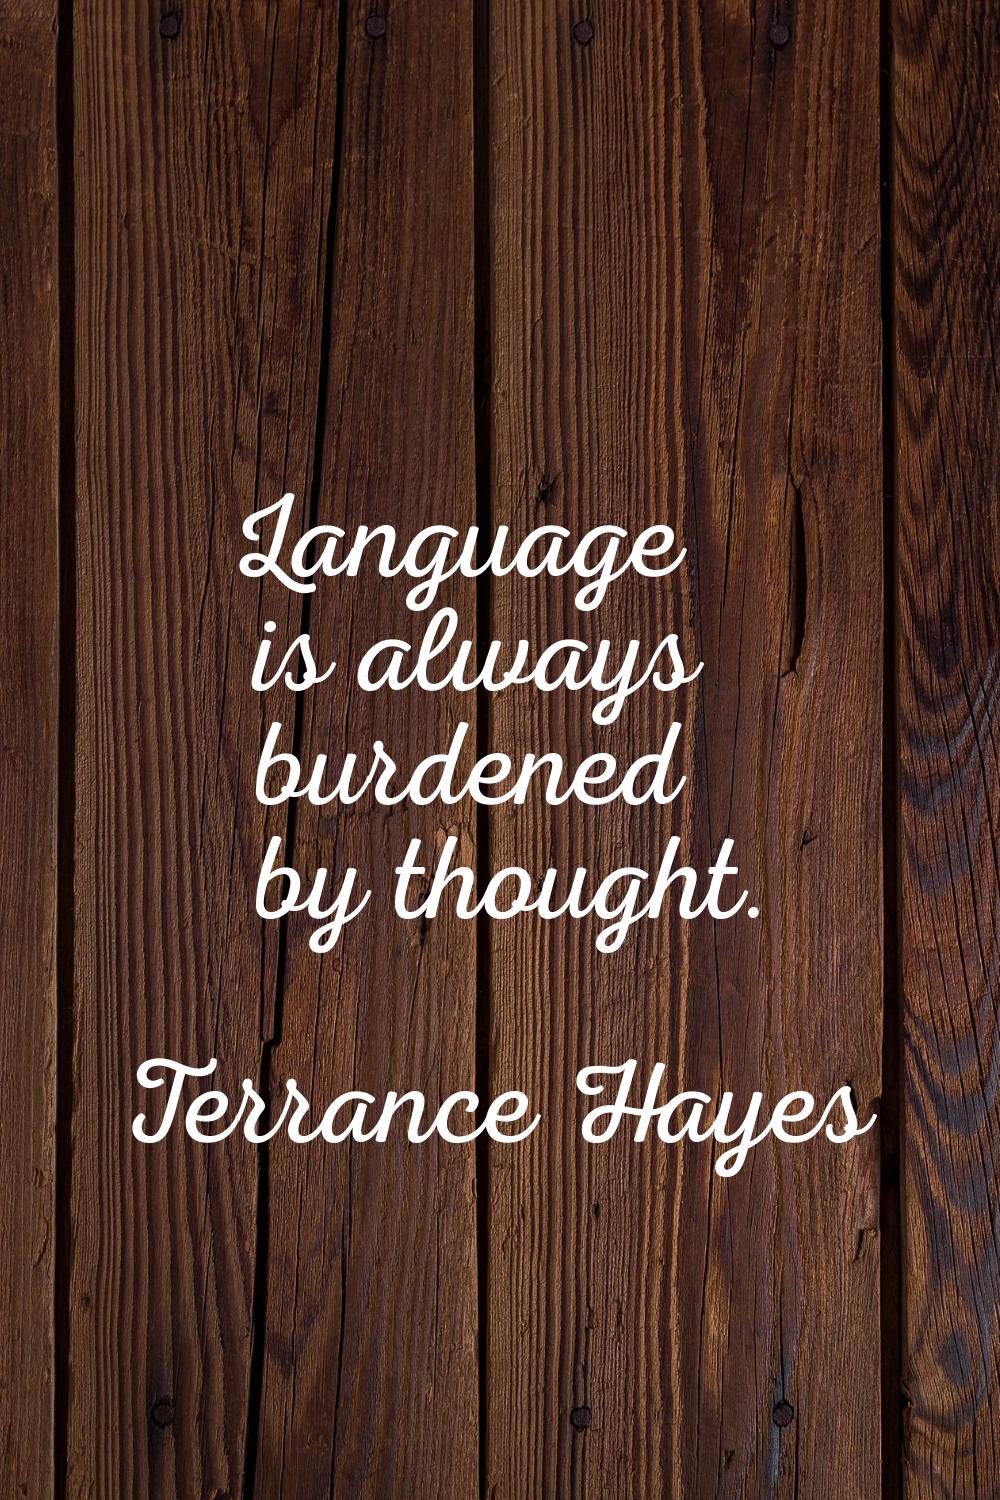 Language is always burdened by thought.